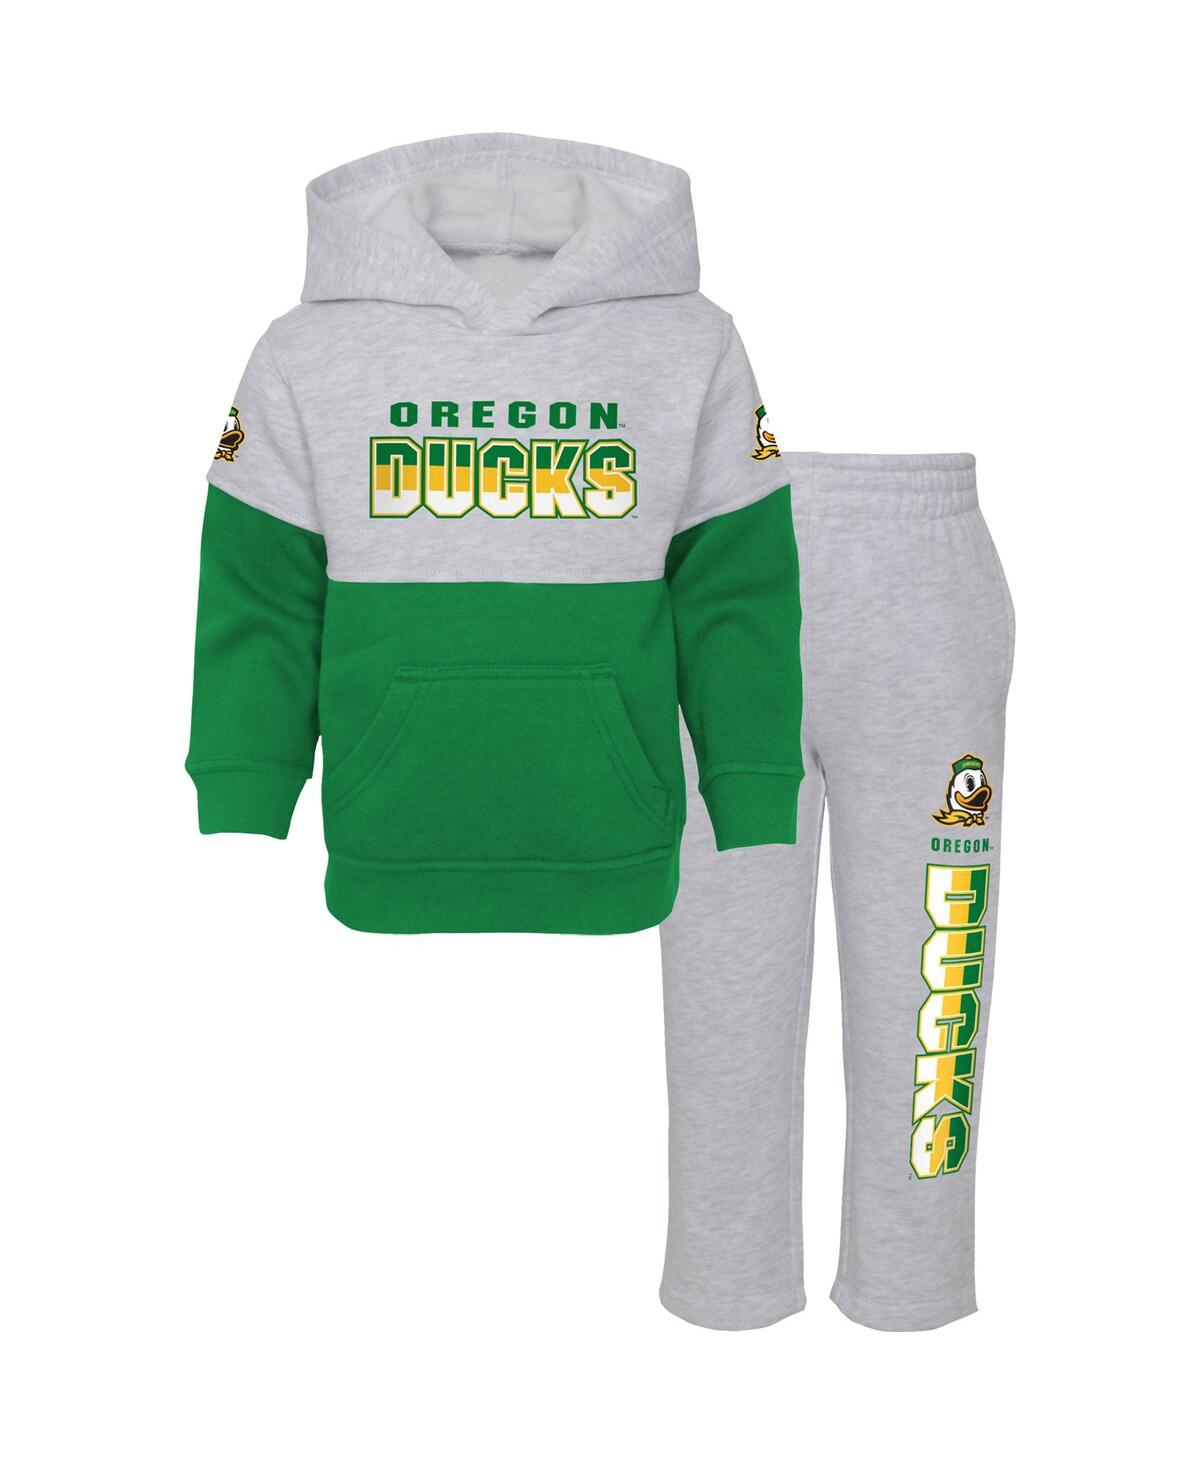 Outerstuff Babies' Infant Boys And Girls Heather Gray And Green Oregon Ducks Playmaker Pullover Hoodie And Pants Set In Heather Gray,green